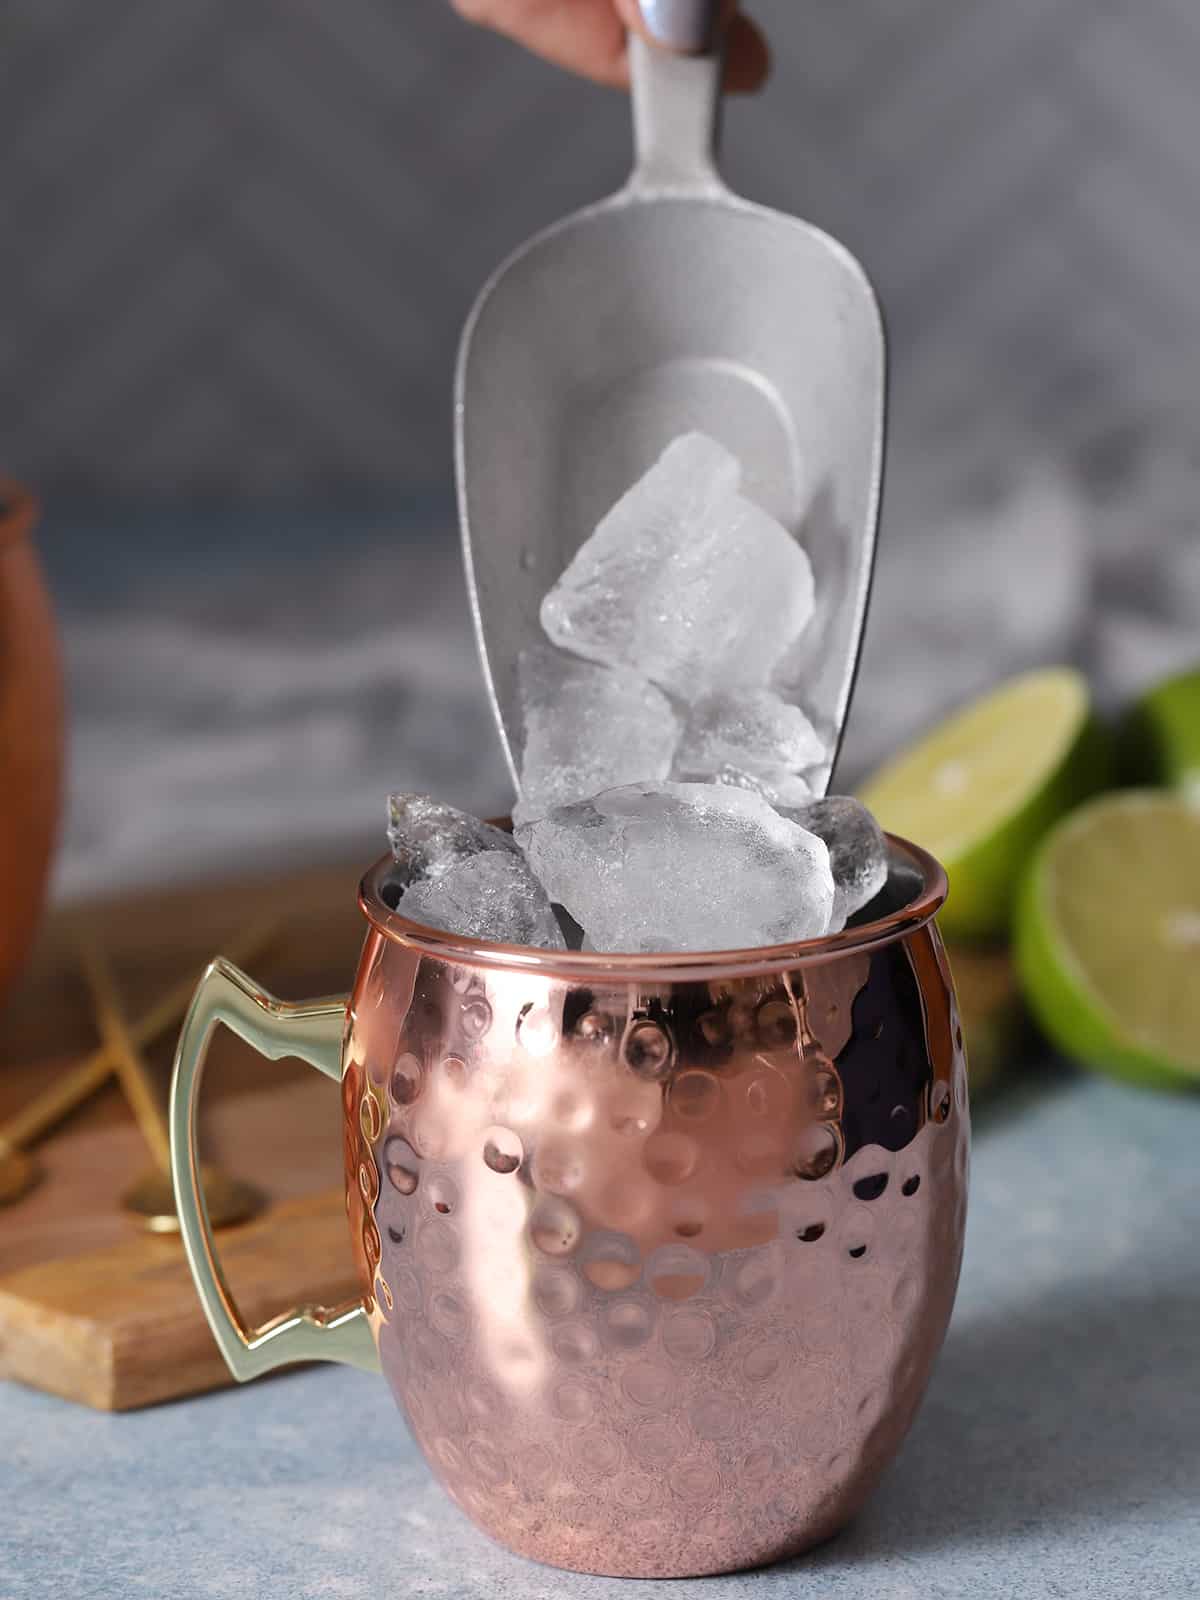 Ice being poured into a copper cup.